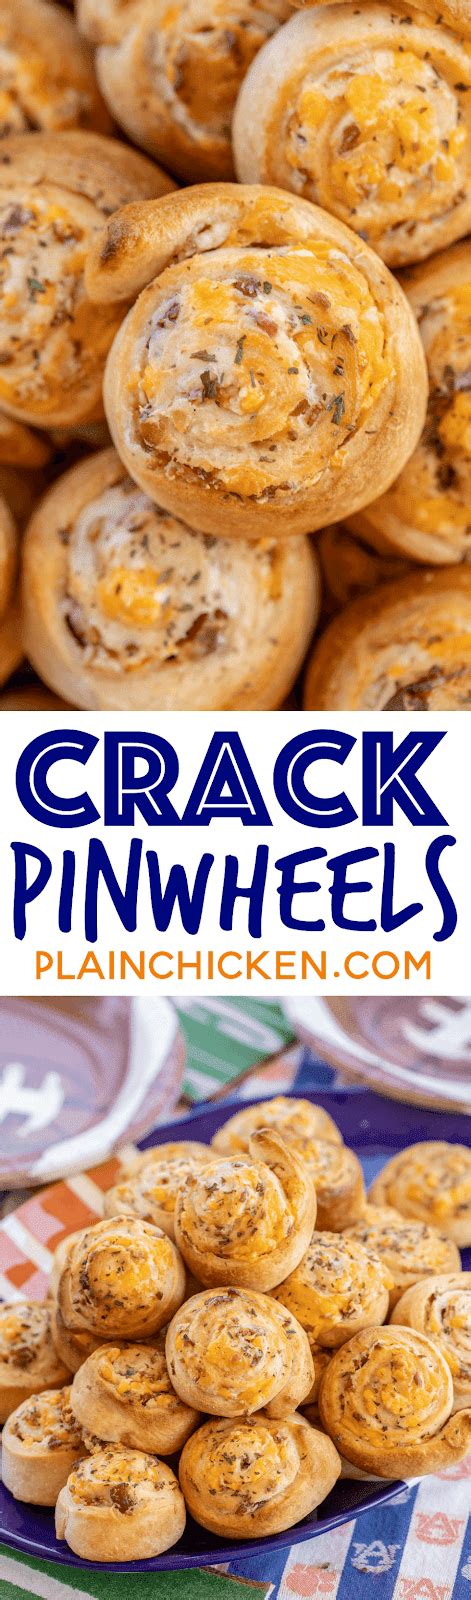 It's also keto friendly, which makes it a great low carb option. Crack Pinwheels - Plain Chicken